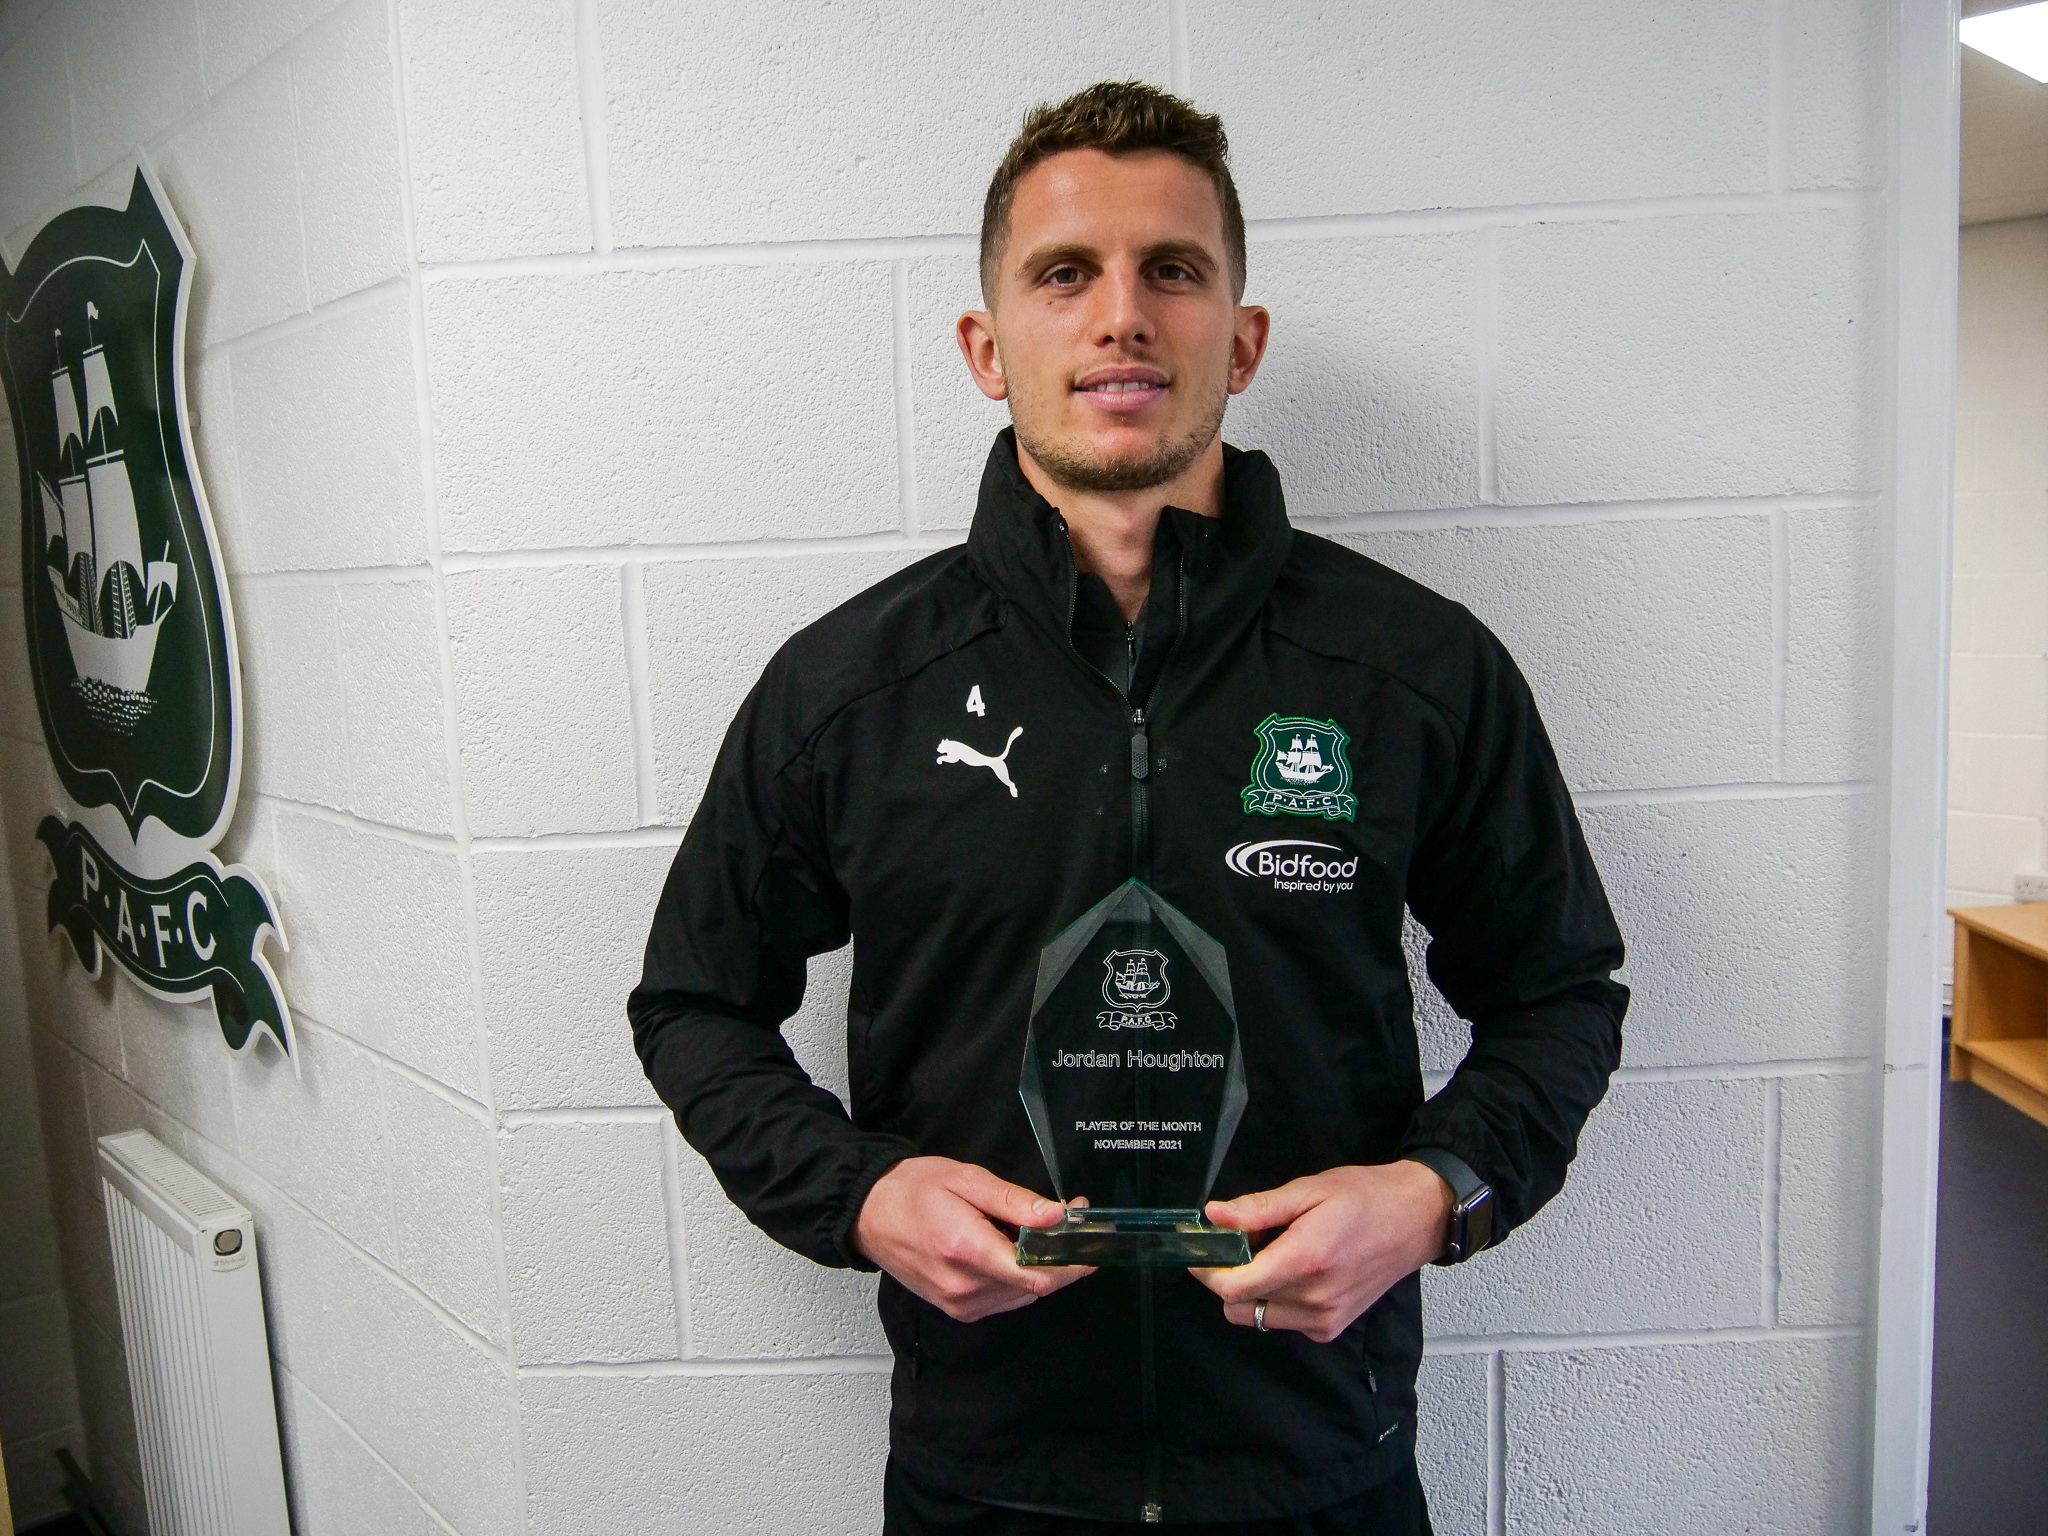 Jordan Houghton player of the month